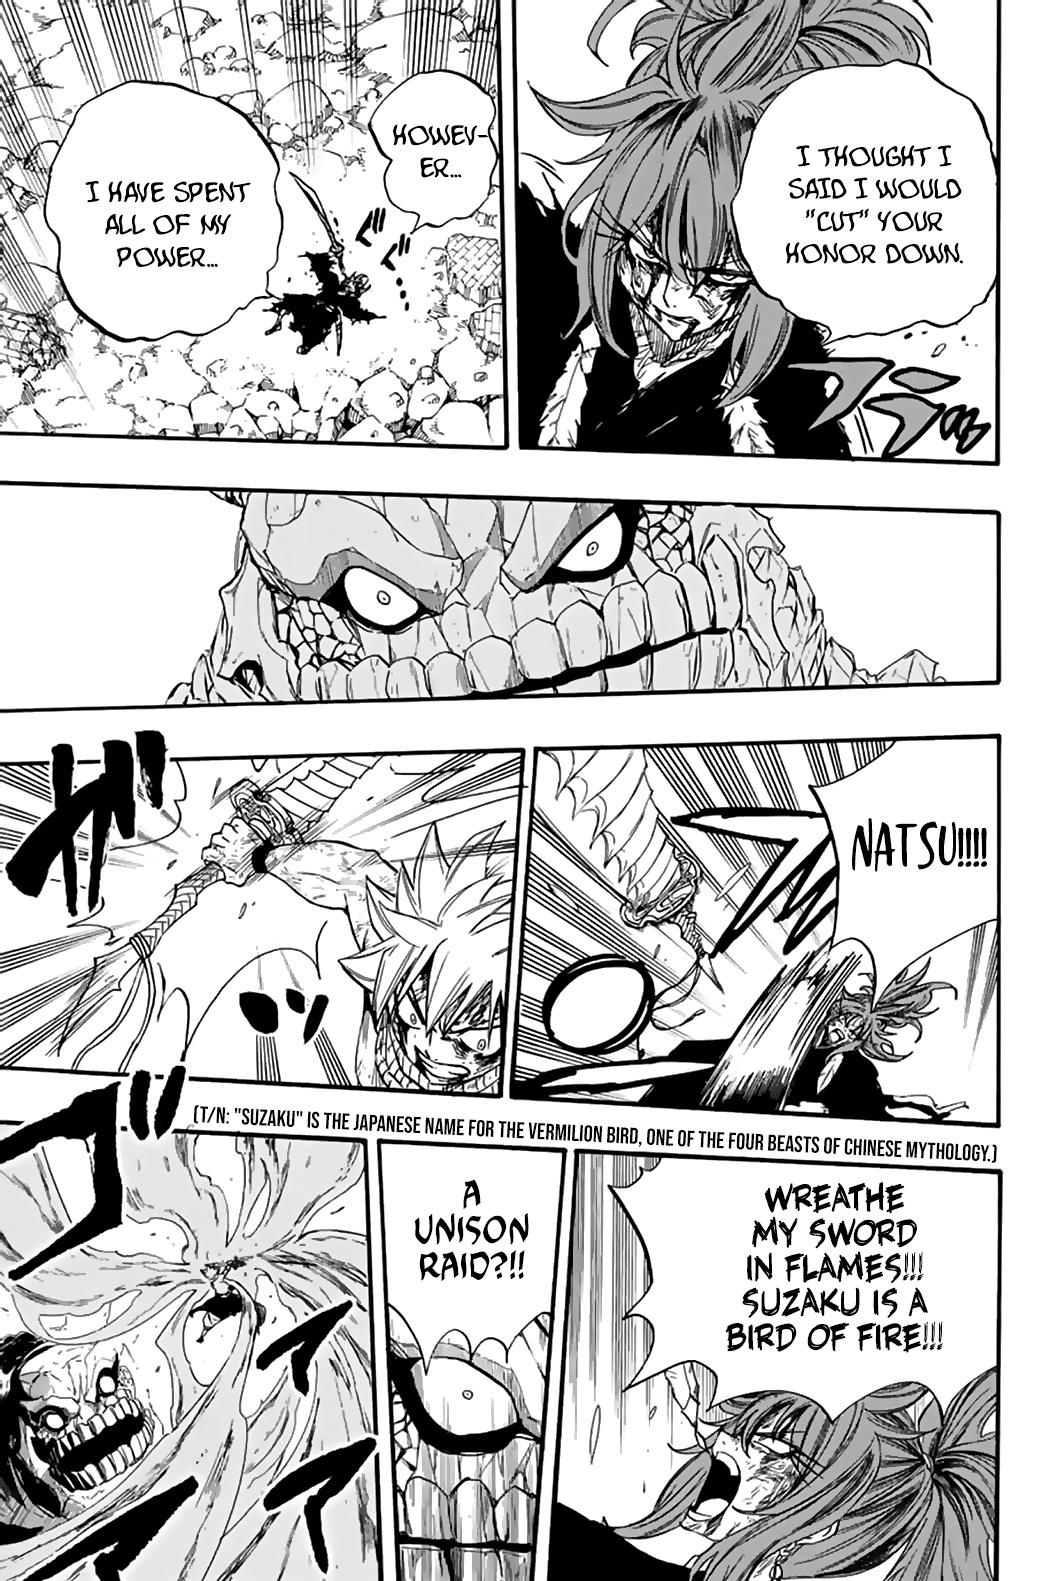 Fairy Tail: 100 Years Quest Chapter 114, Fairy Tail Wiki